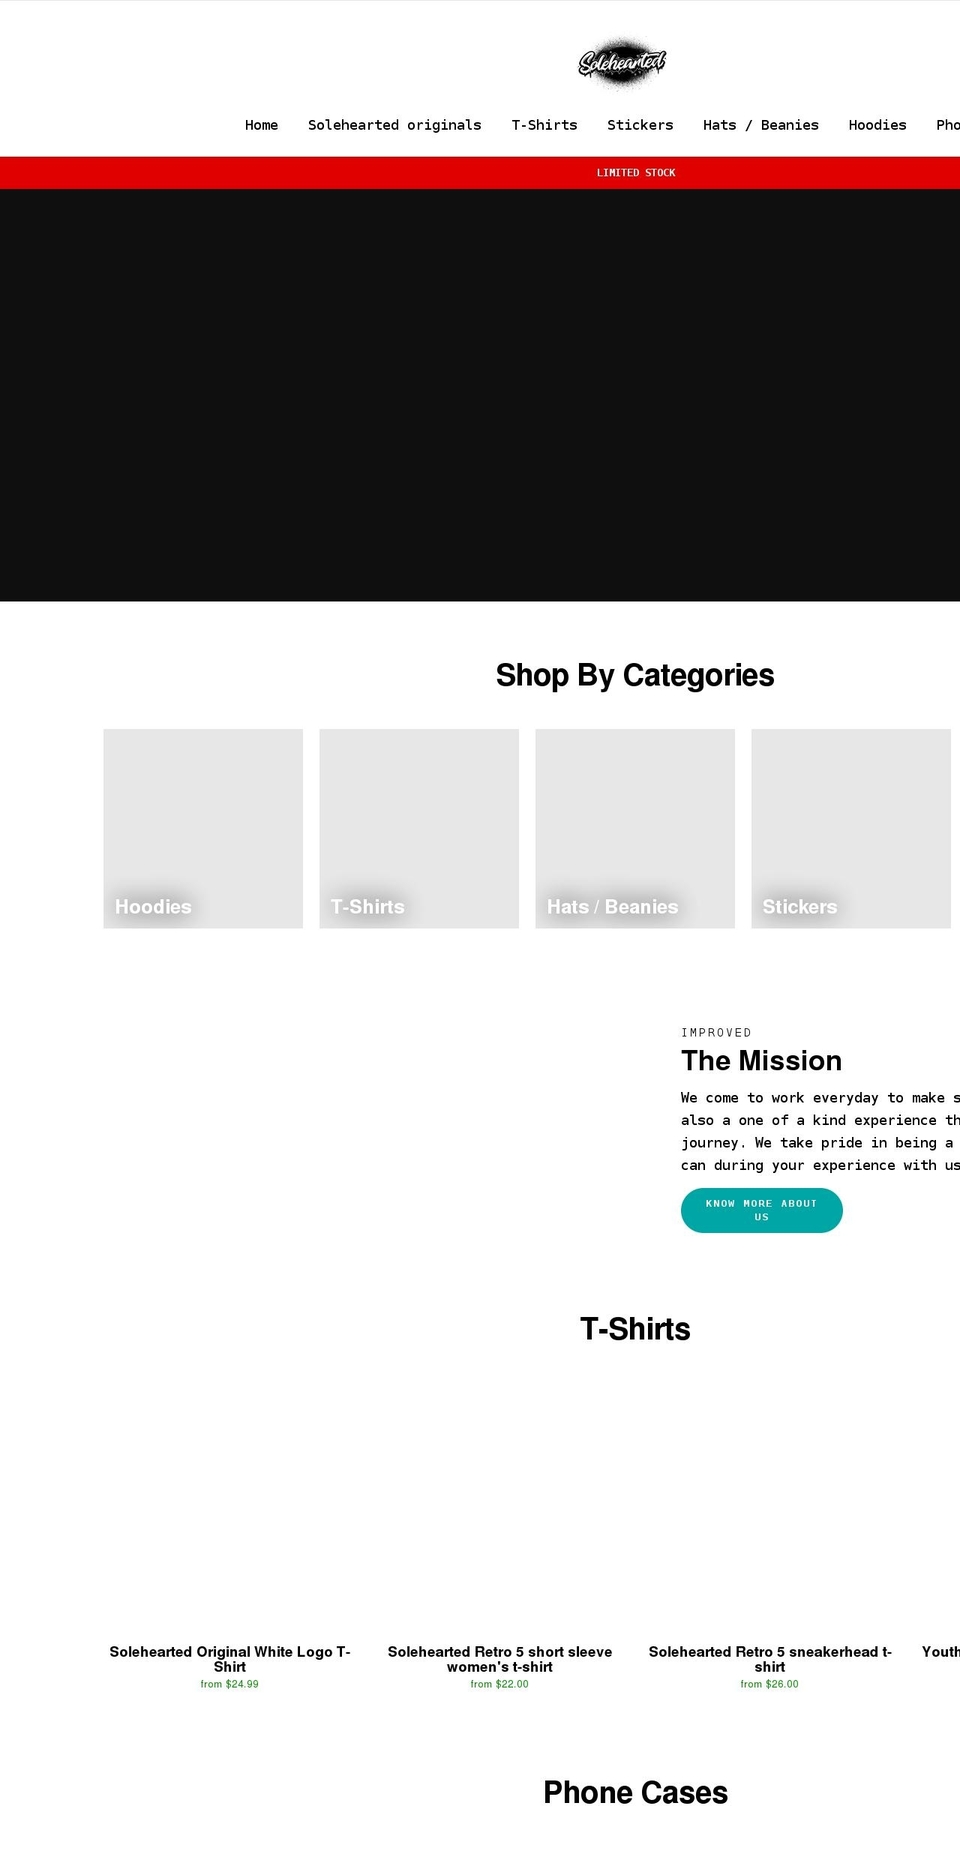 Theme export Shopify theme site example solehearted.com